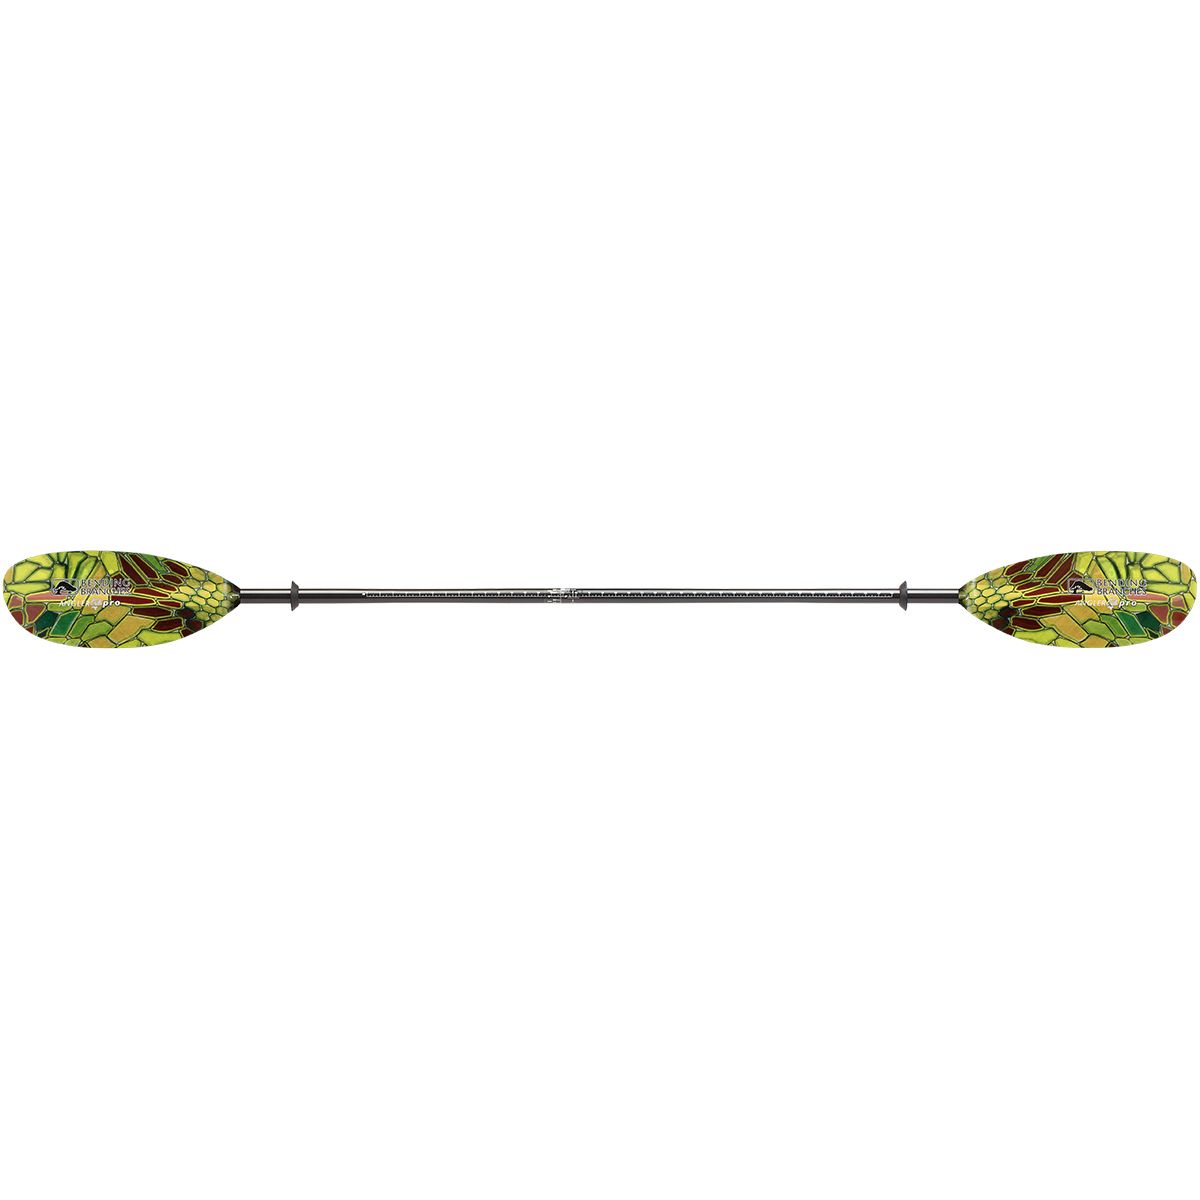 Bending Branches Angler Pro Plus 2-Piece Fishing Paddle - 2022